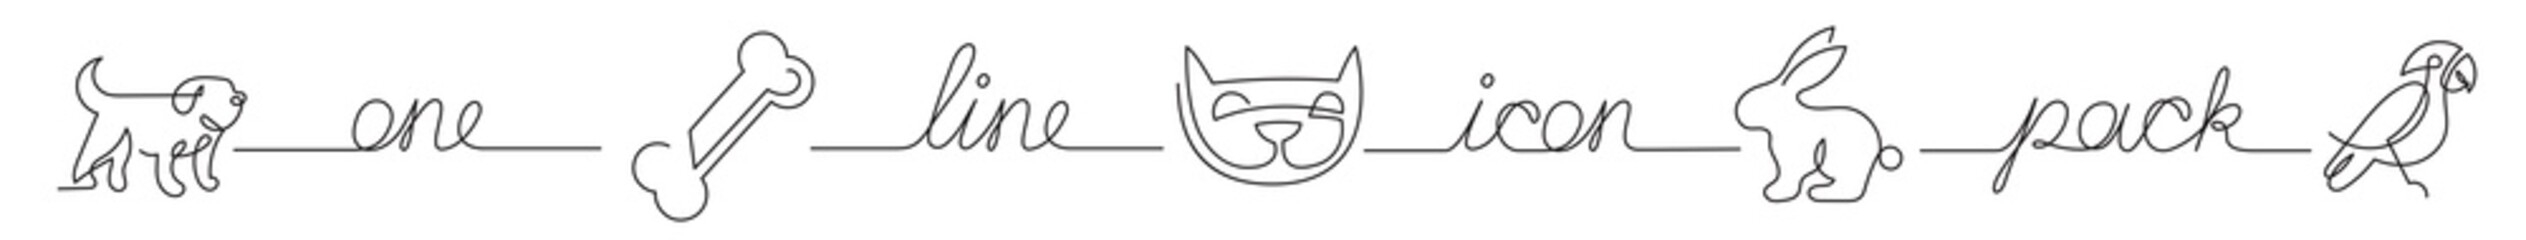 one line icon pack of veterinary dog pets - PNG image with transparent background